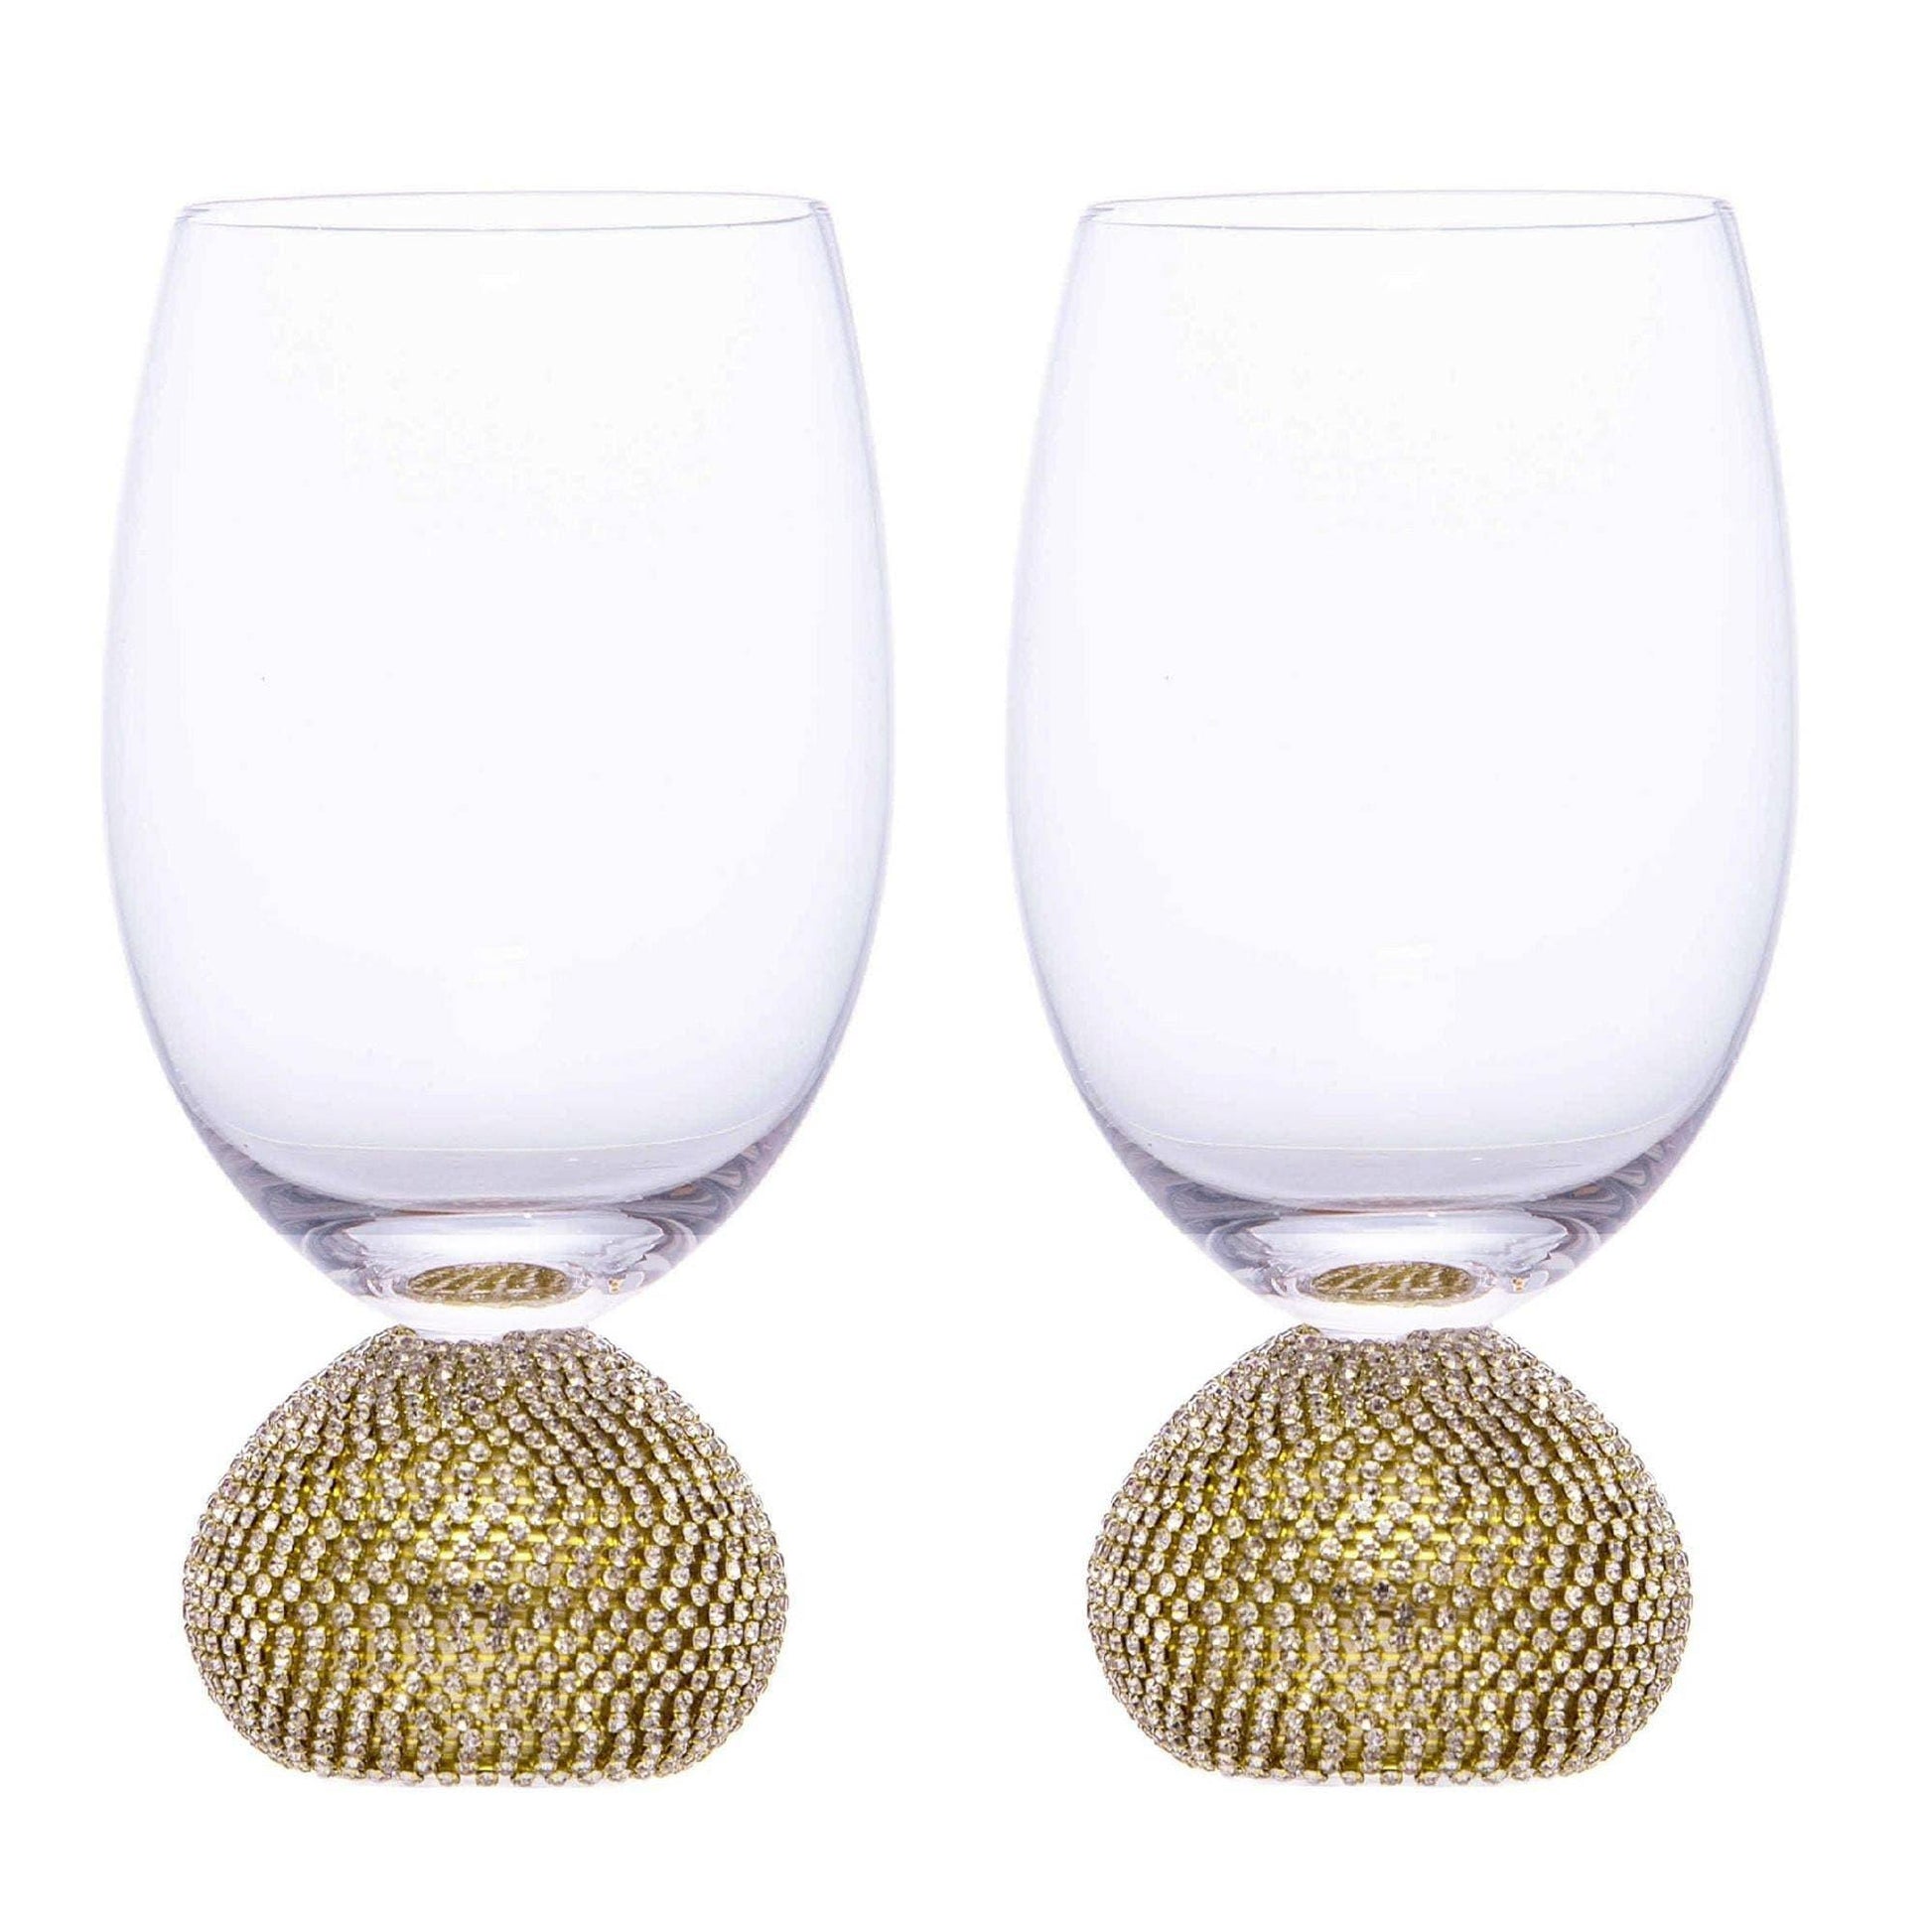 https://jerseyartglass.com/cdn/shop/products/jersey-art-glass-bling-wine-glasses-set-of-2-wine-set-wine-glass-cocktail-glasses-wine-gifts-mother-s-day-gift-gifts-for-her-32237405536420.jpg?v=1669325175&width=1946